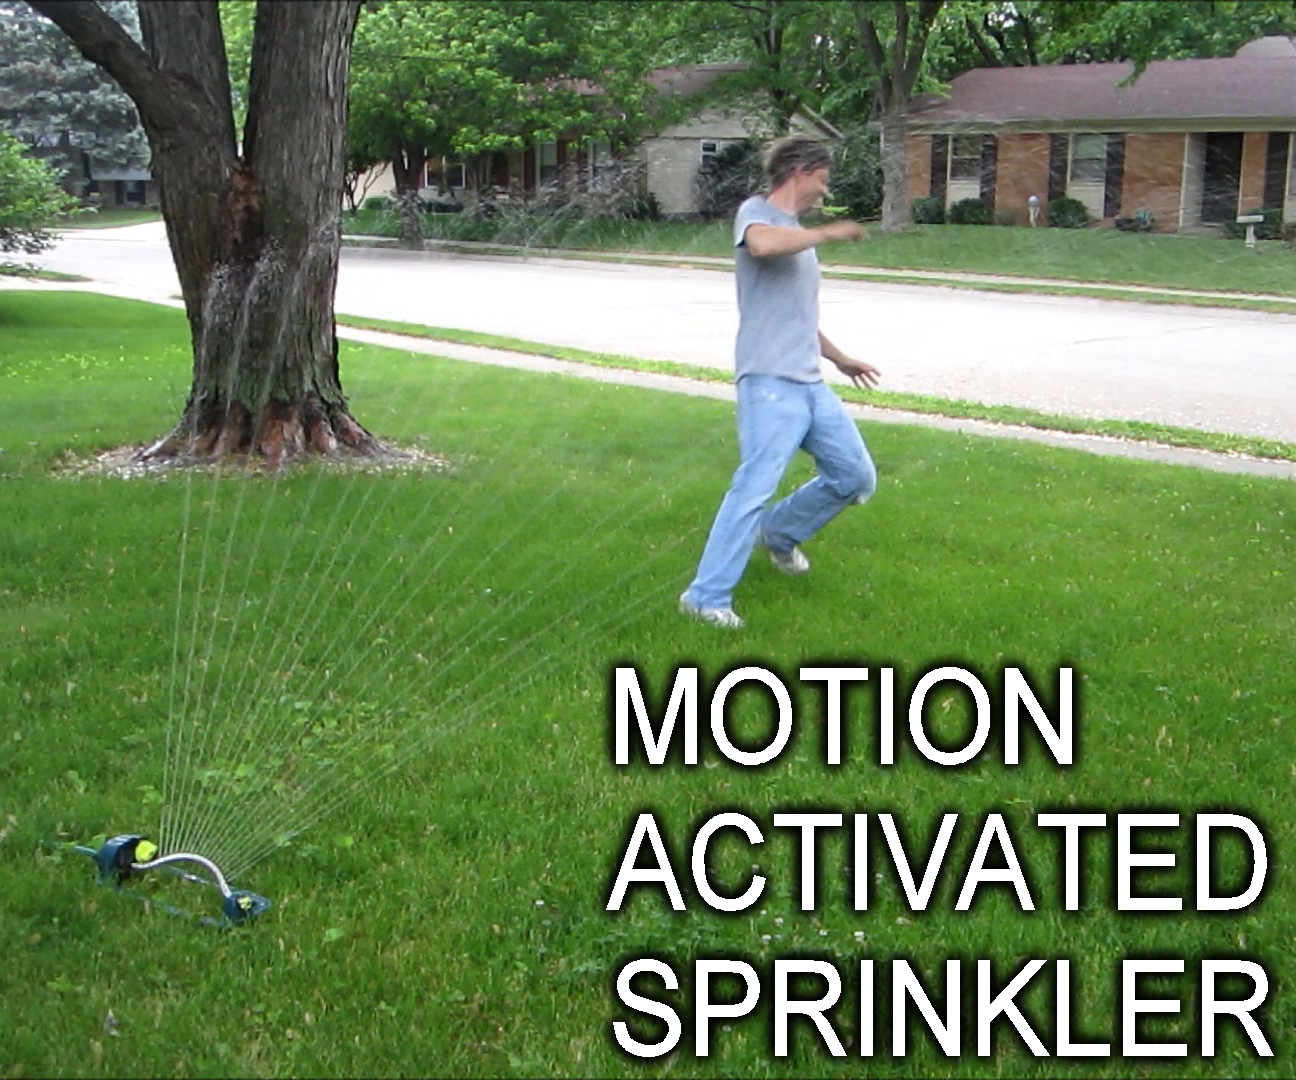 Keep Unwanted Visitors Away With a Motion Activated Sprinkler